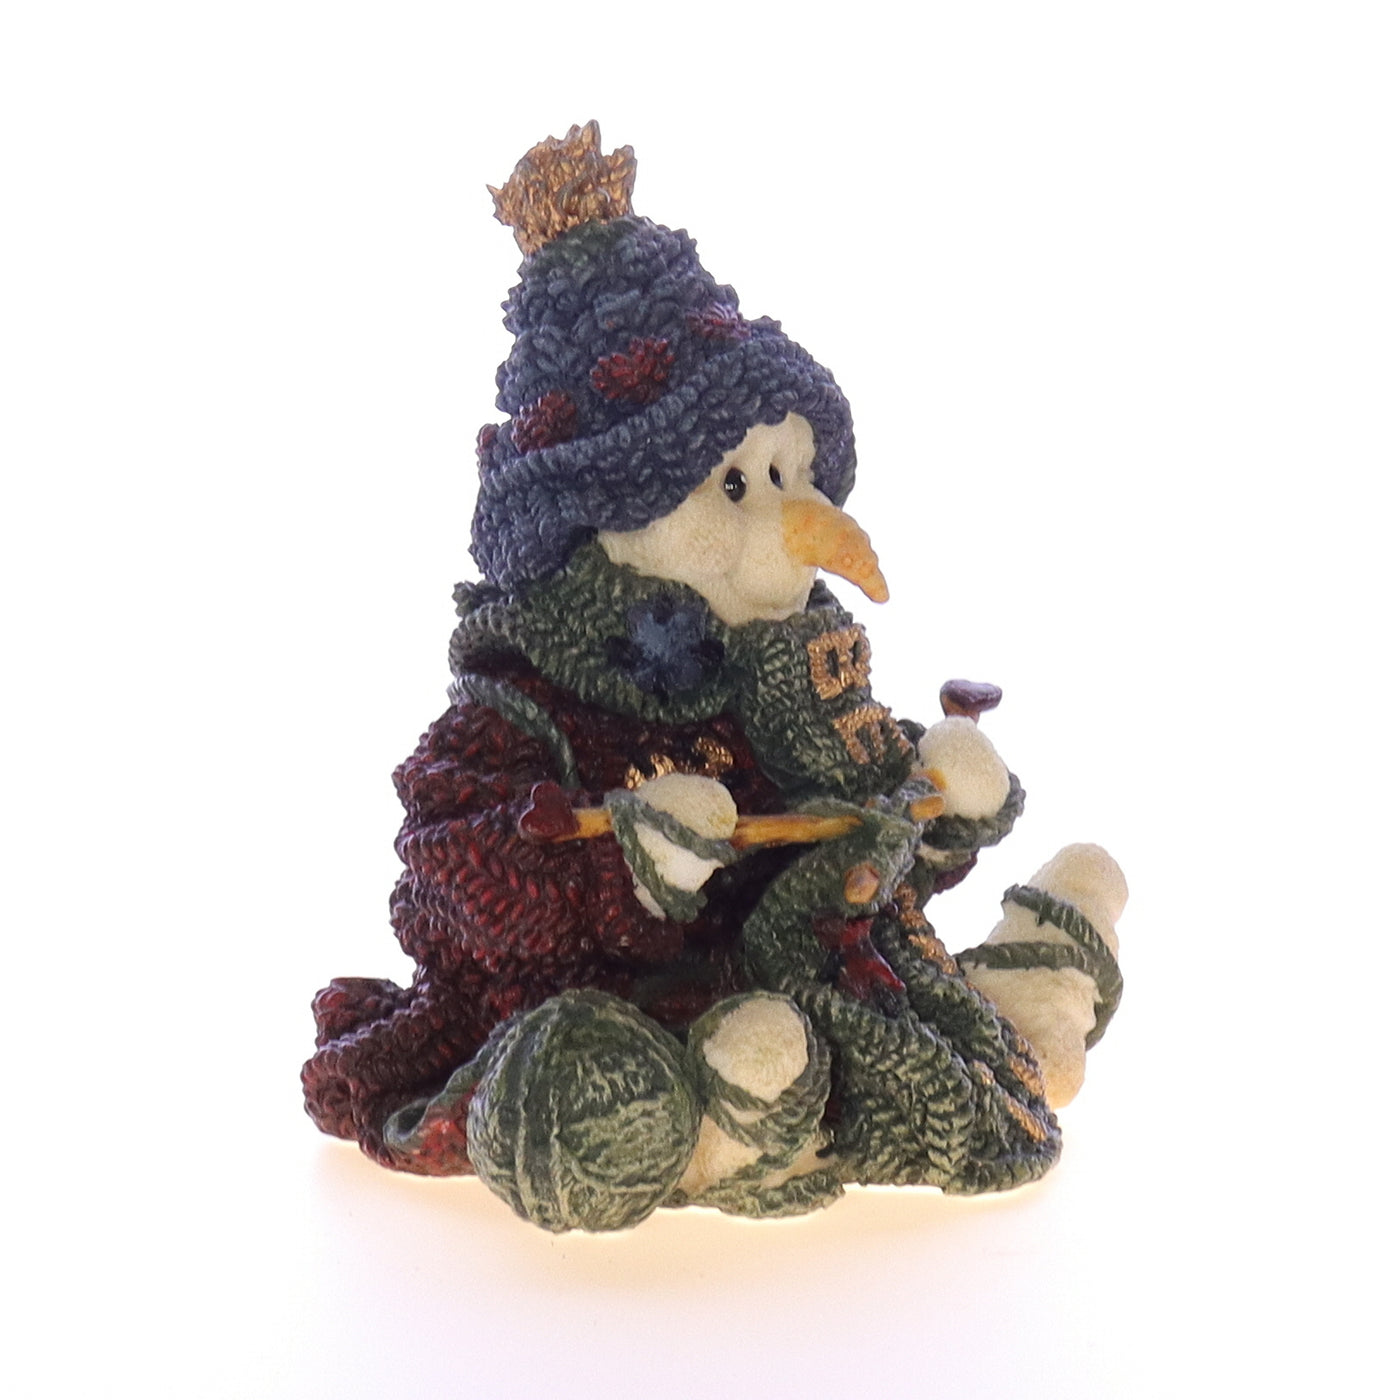 The_Wee_Folkstone_Collection_36501-1_Pearl_Too_The_Knitter_Christmas_Figurine_1997 Front Right View